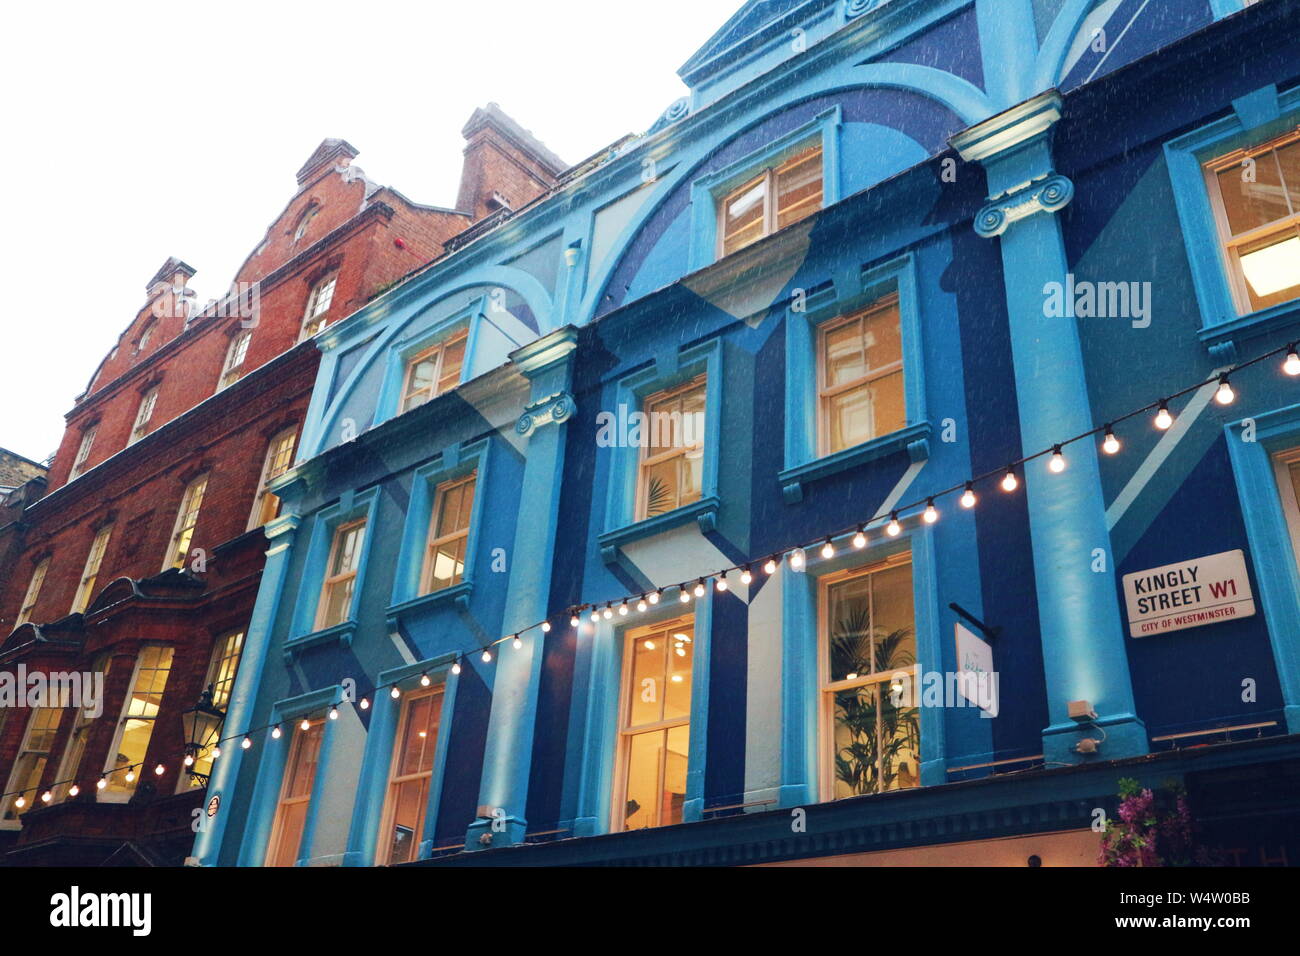 Blue colored house exterior on Kingly Street in Soho London, UK. Stock Photo